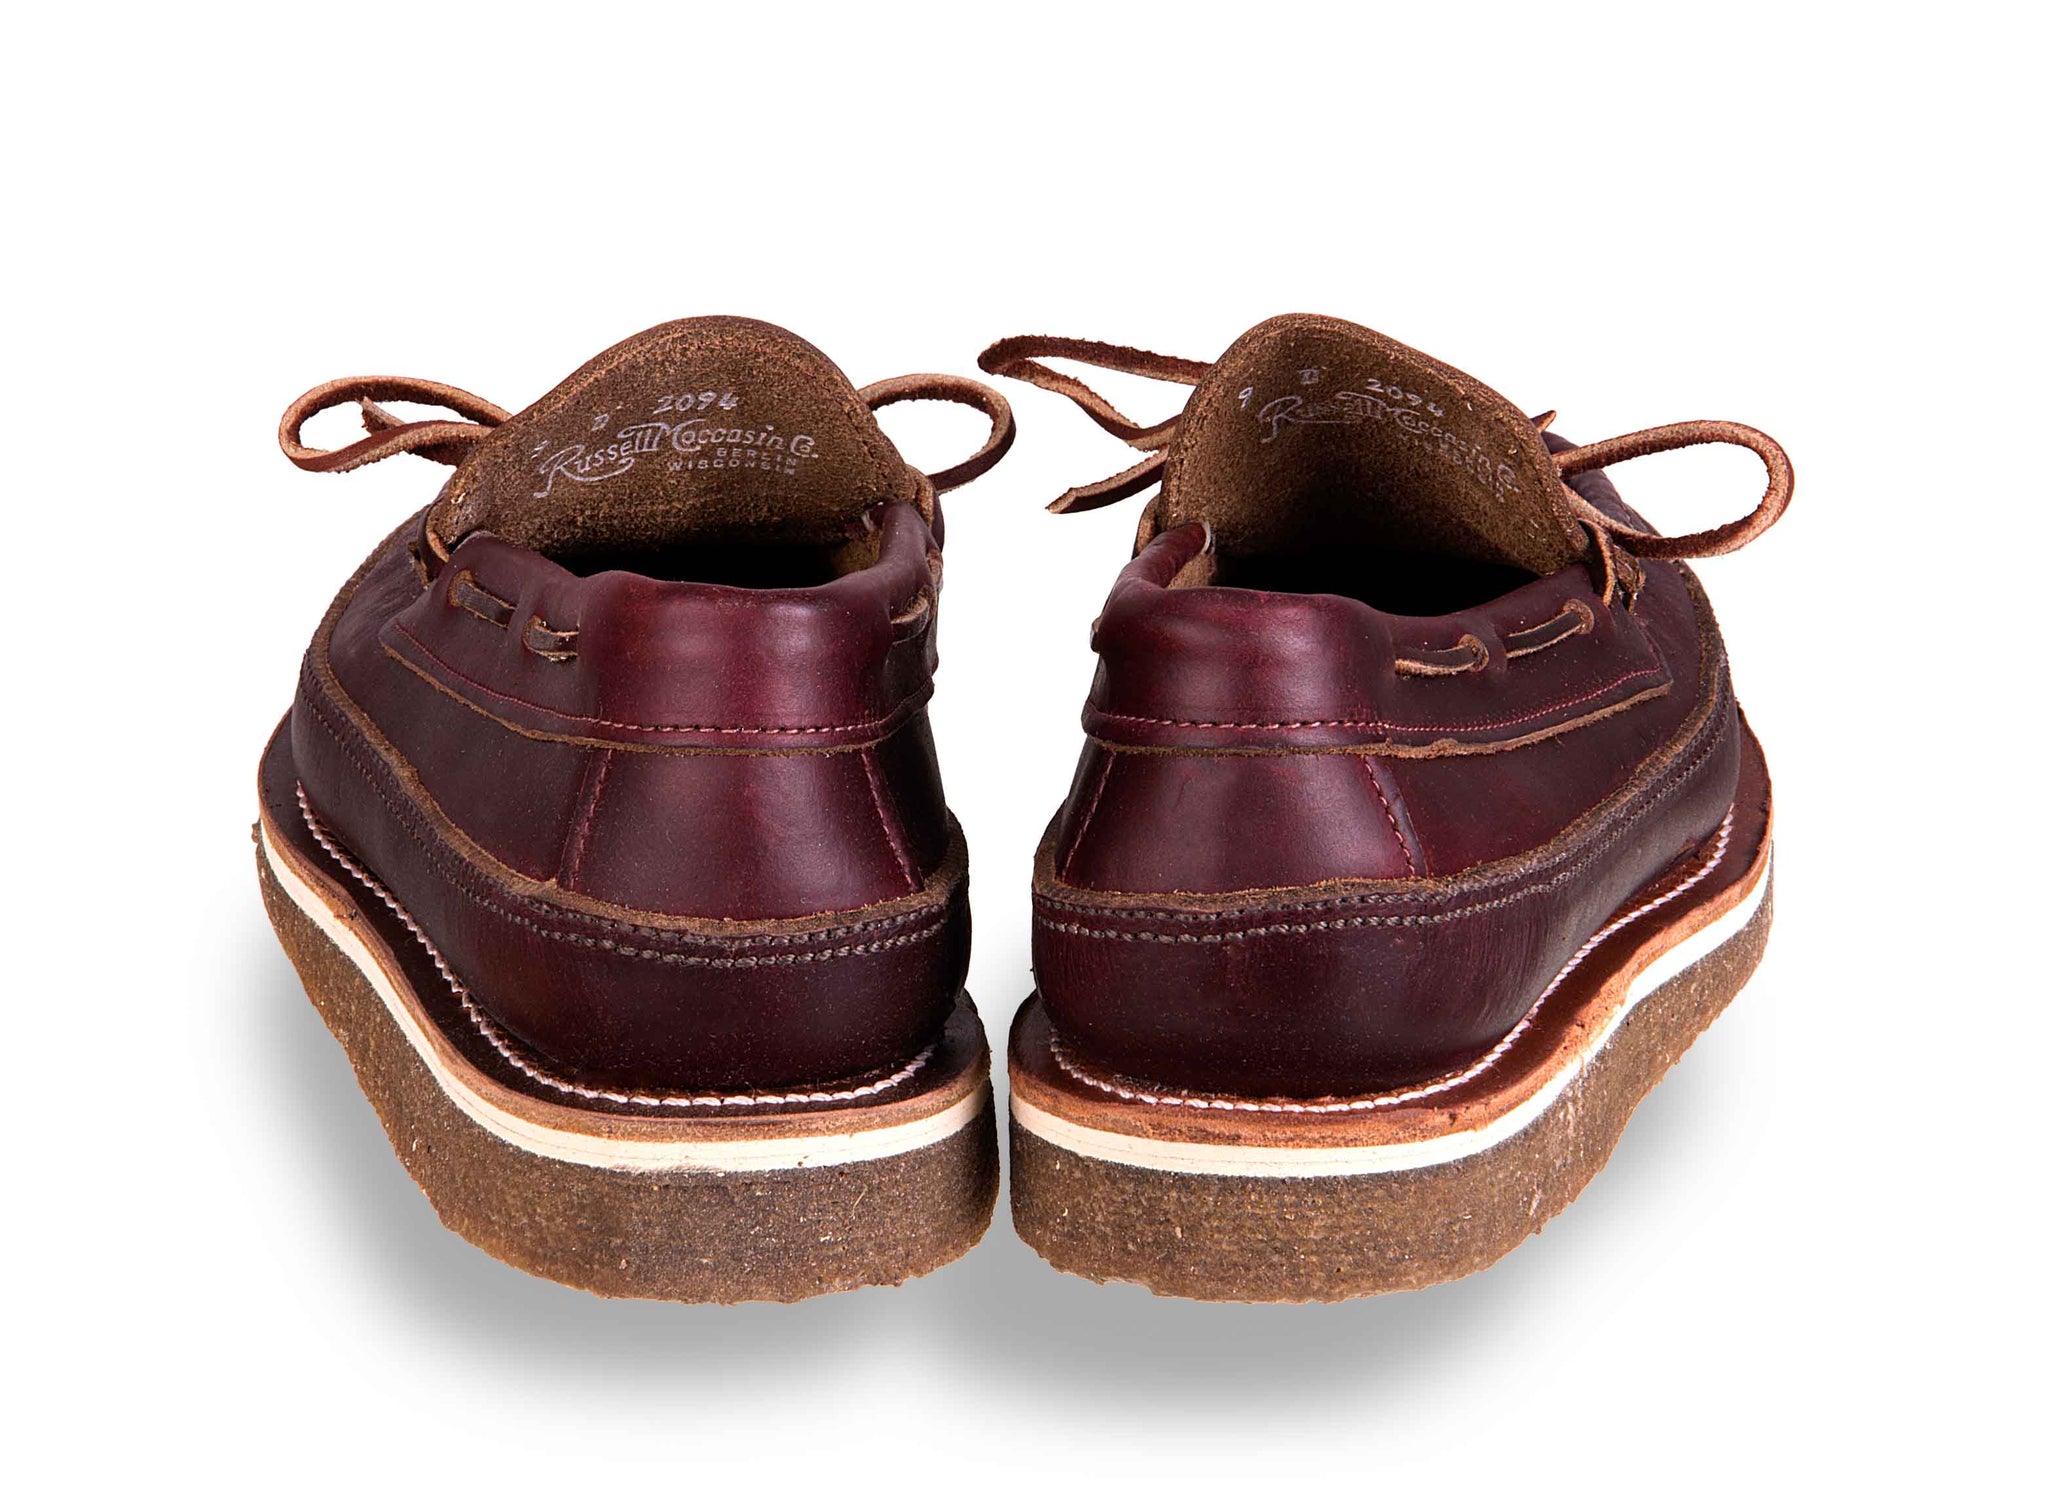 russell moccasin uk